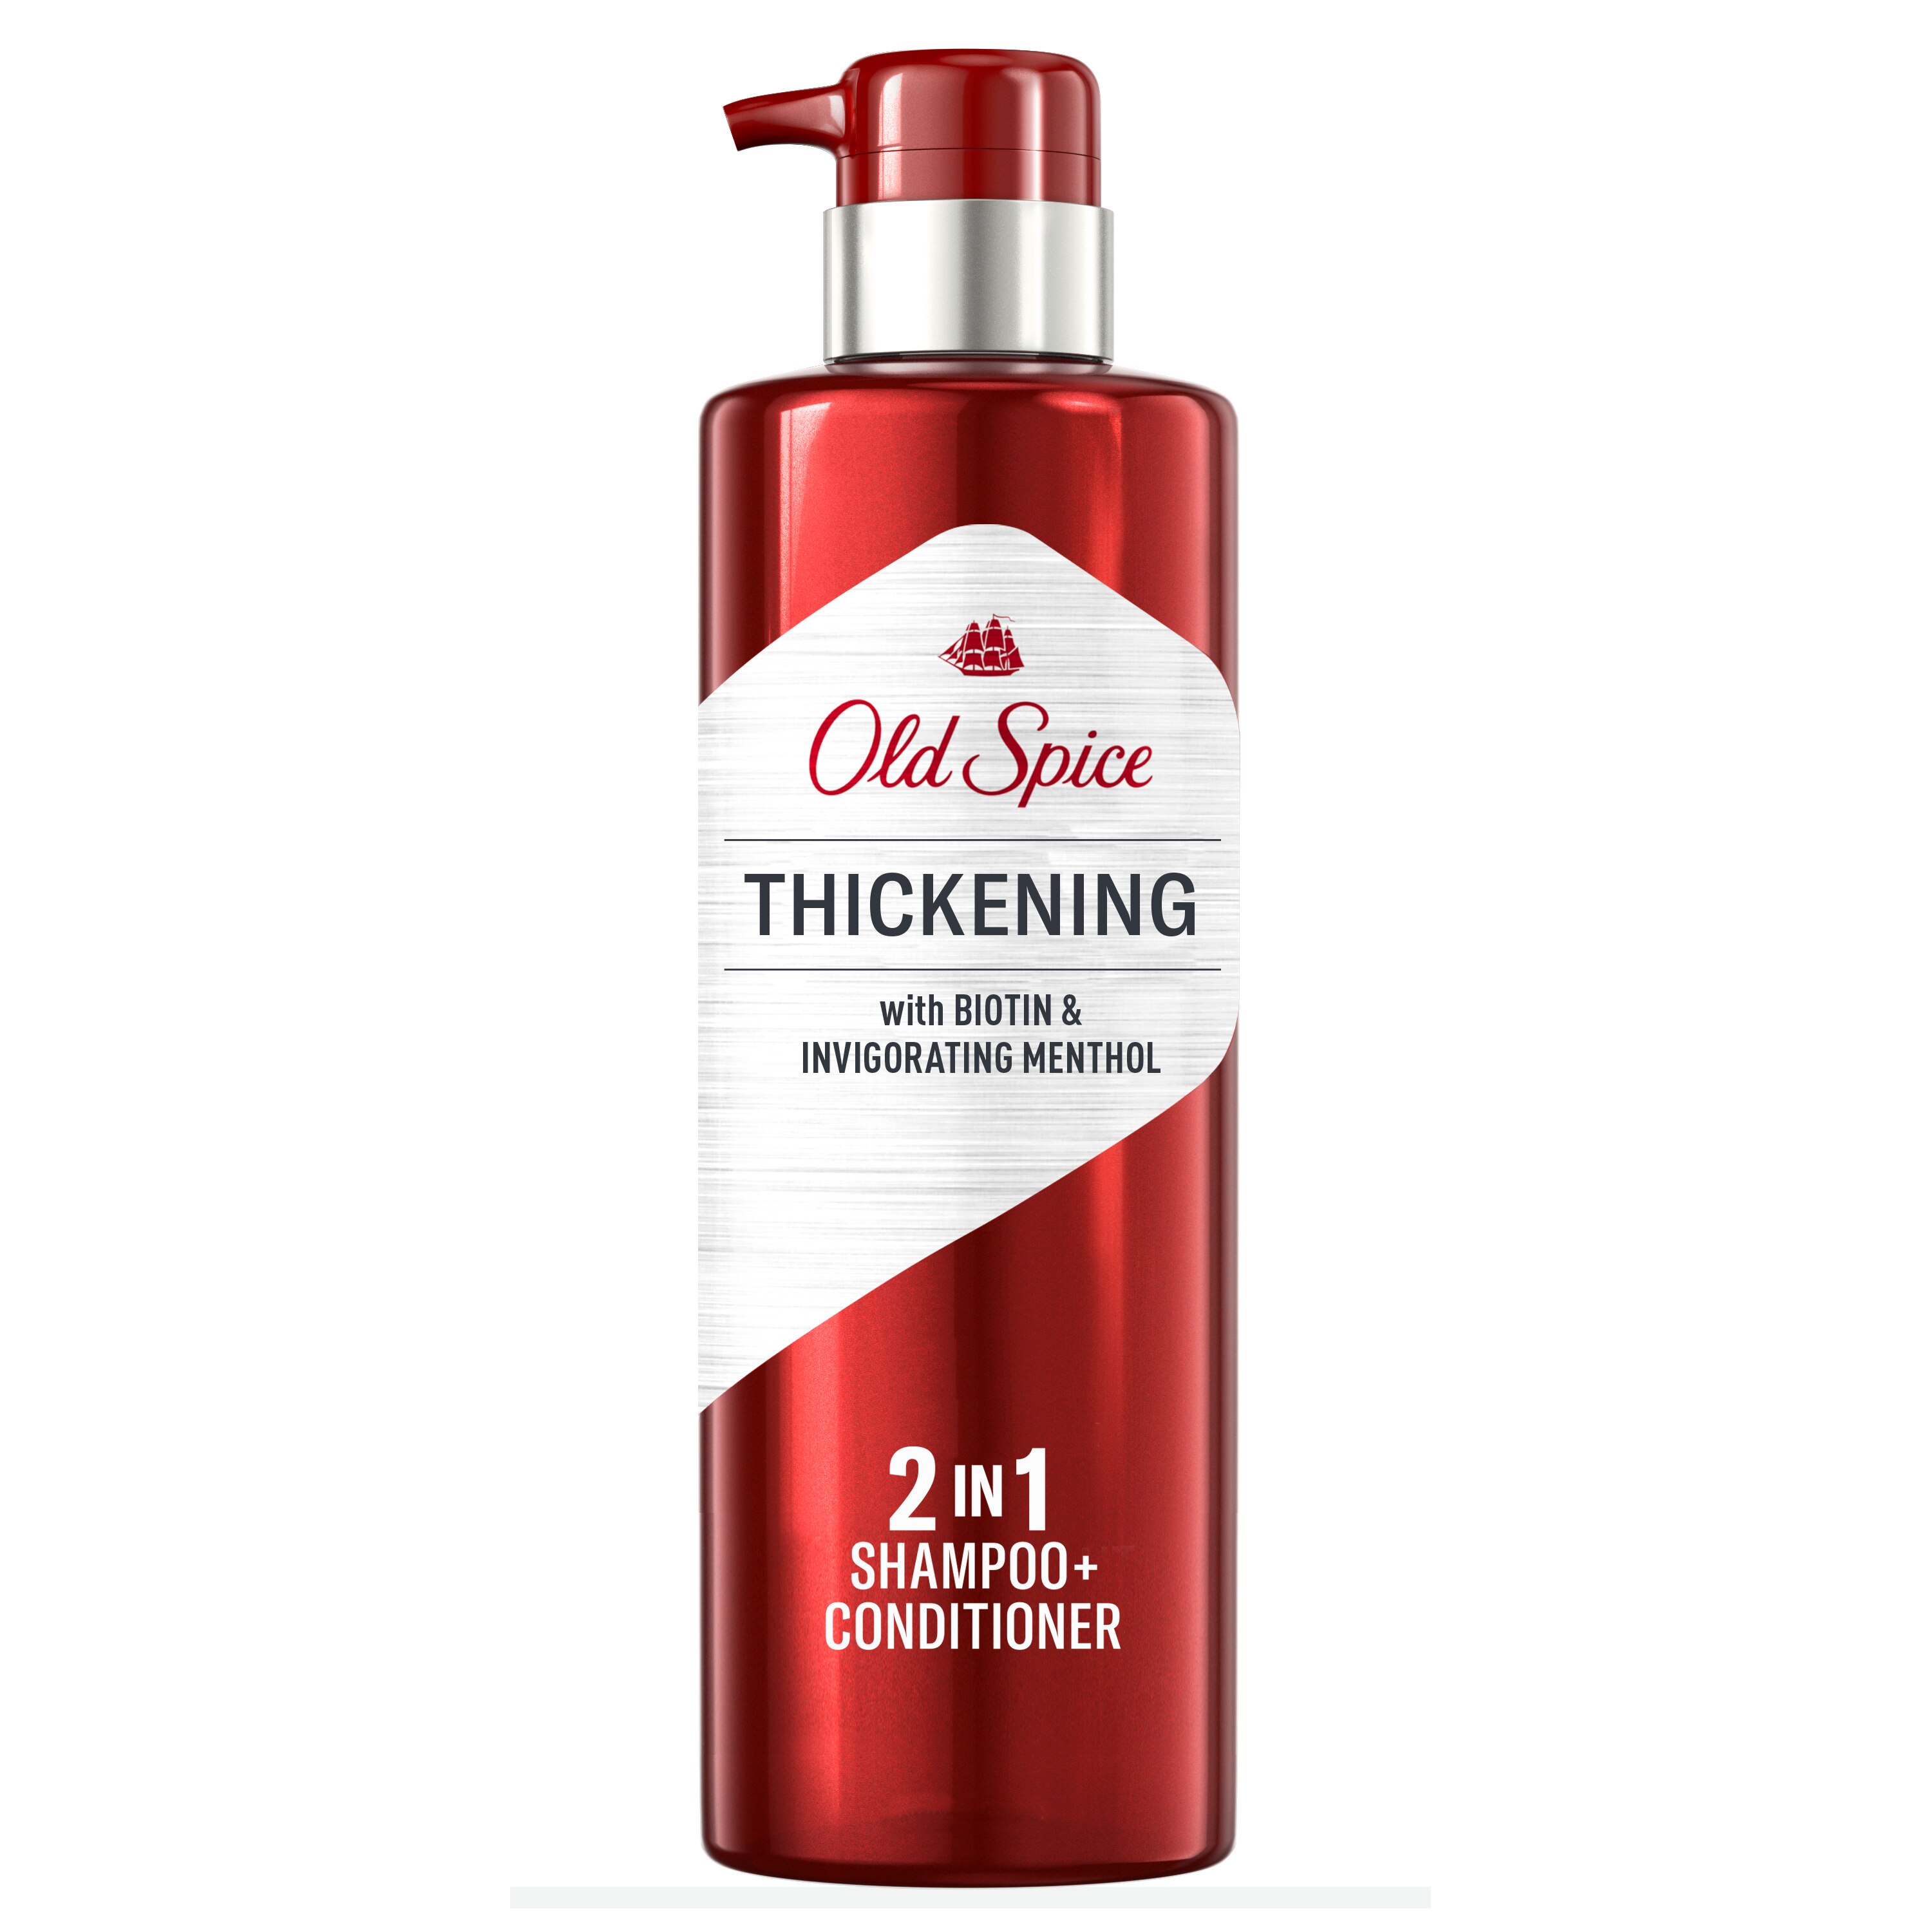 Old Spice Thickening 2-in-1 Shampoo & Conditioner